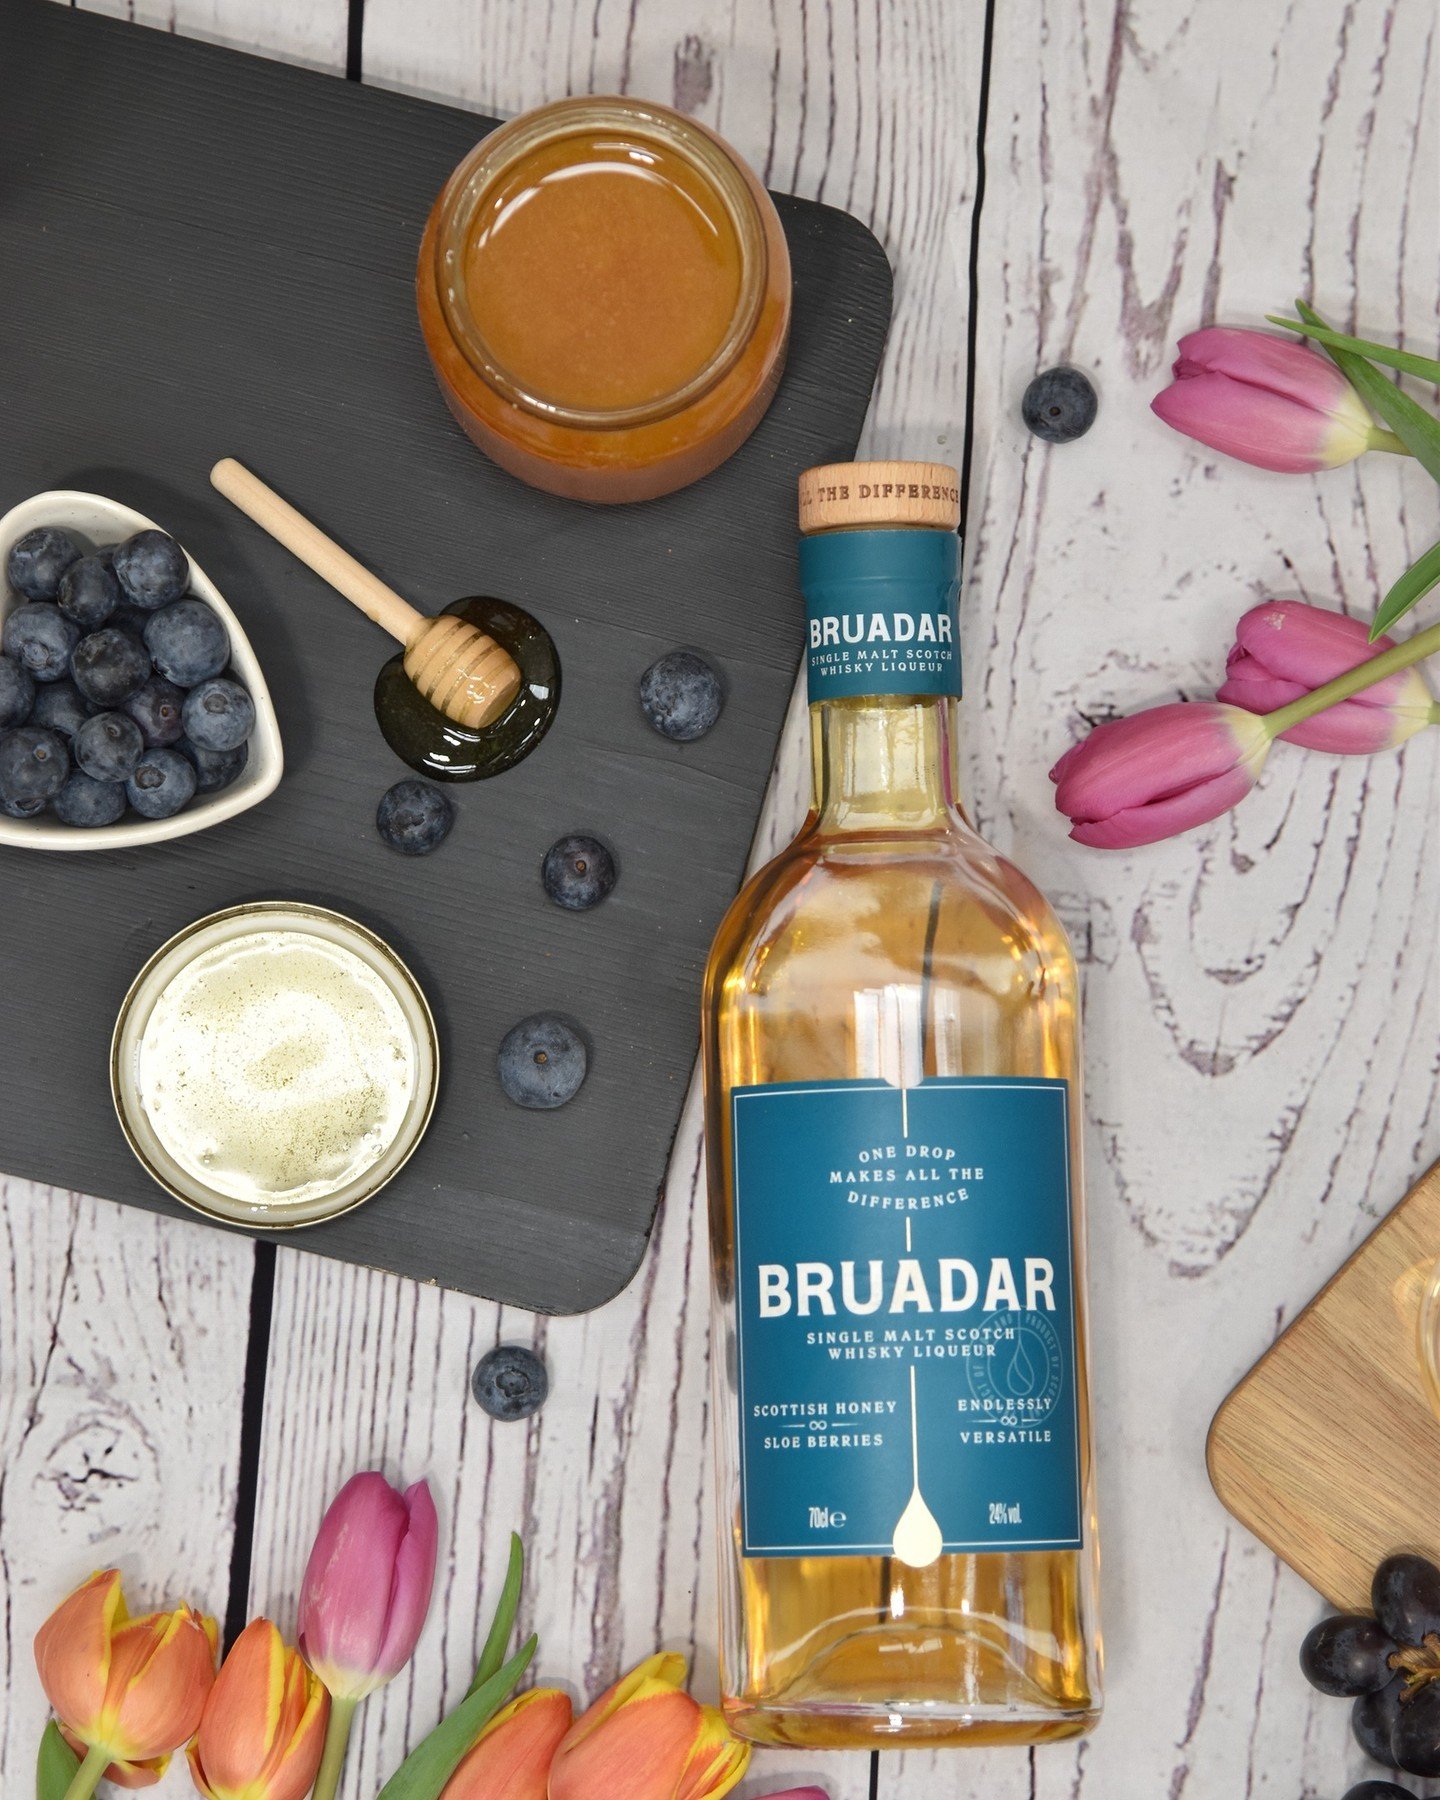 Who's ready for the weekend?! We certainly are ✨️⁠
⁠
Let us know your current favourite cocktail right now! 👇🏼⁠
-⁠
-⁠
-⁠
-⁠
-⁠
⁠
#bruadar #liqueur #whisky #whiskey #mswd #morrisonscotchwhiskydistillers #morrisondistillers #scottishwhisky #honey #sl